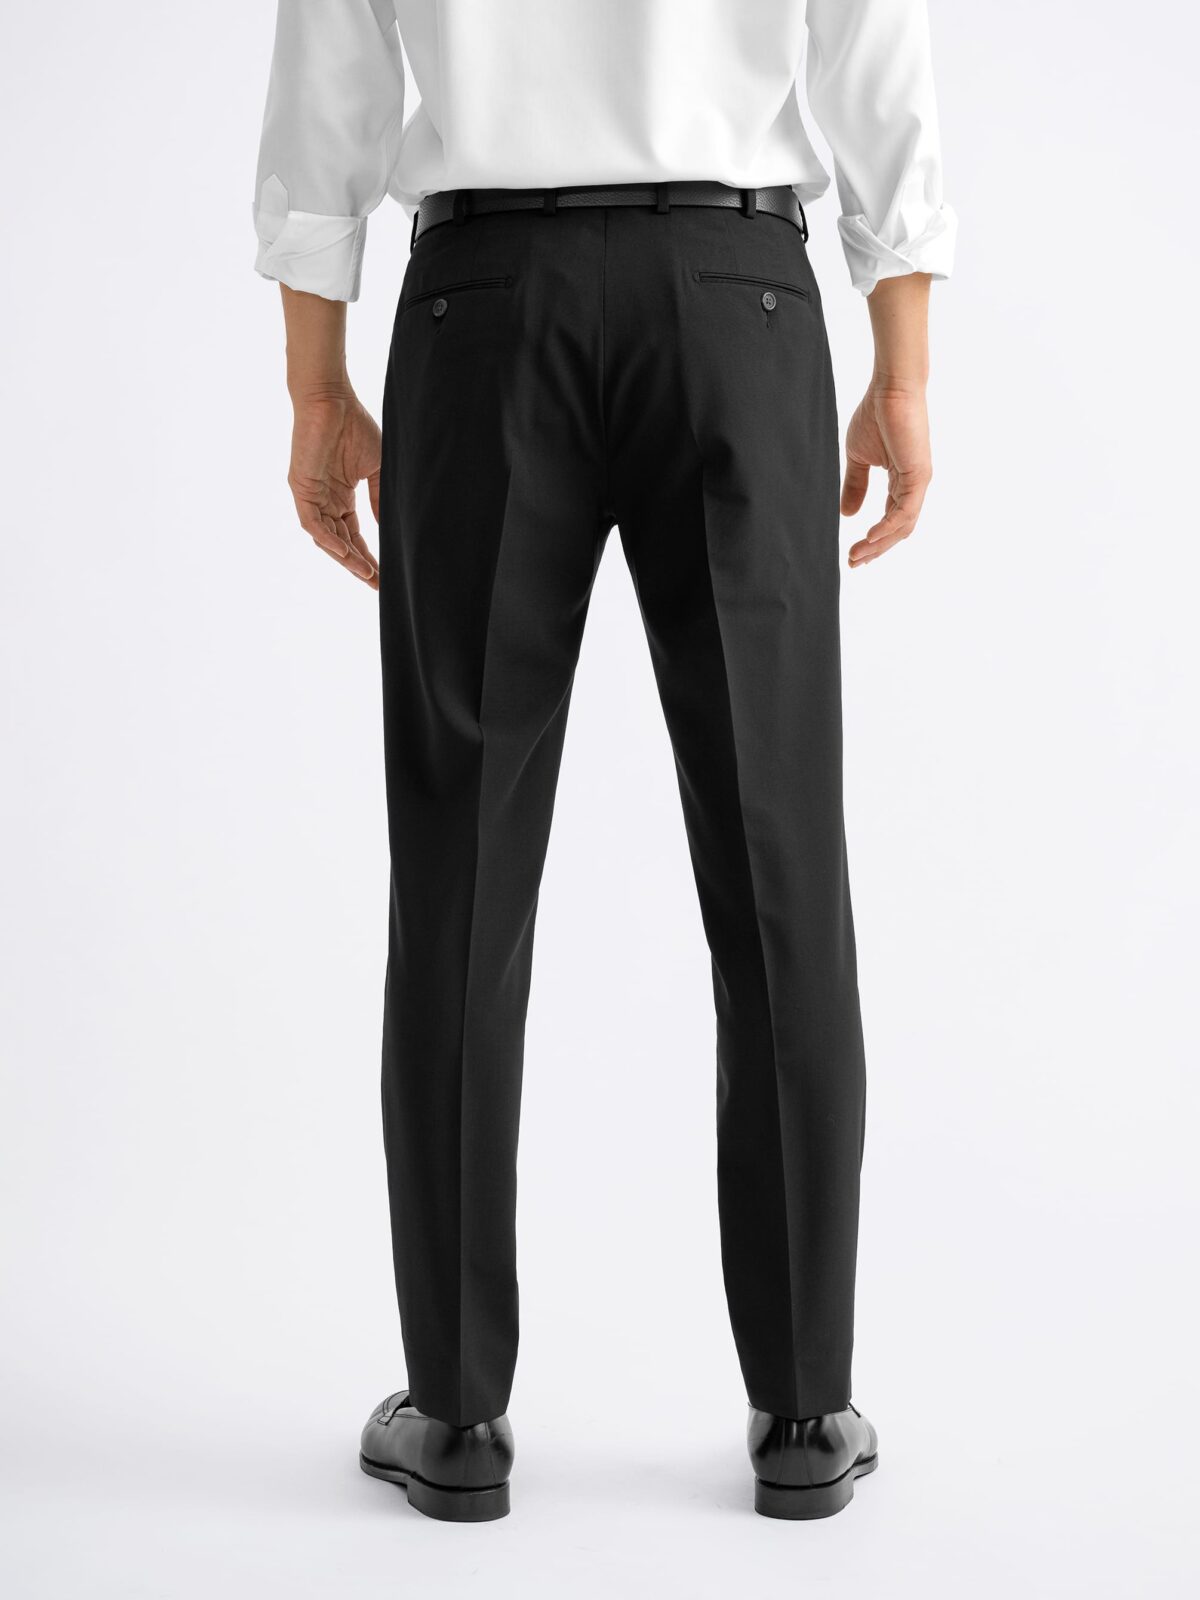 4-Way Stretch Formal Trousers in Charcoal Grey- Slim Fit